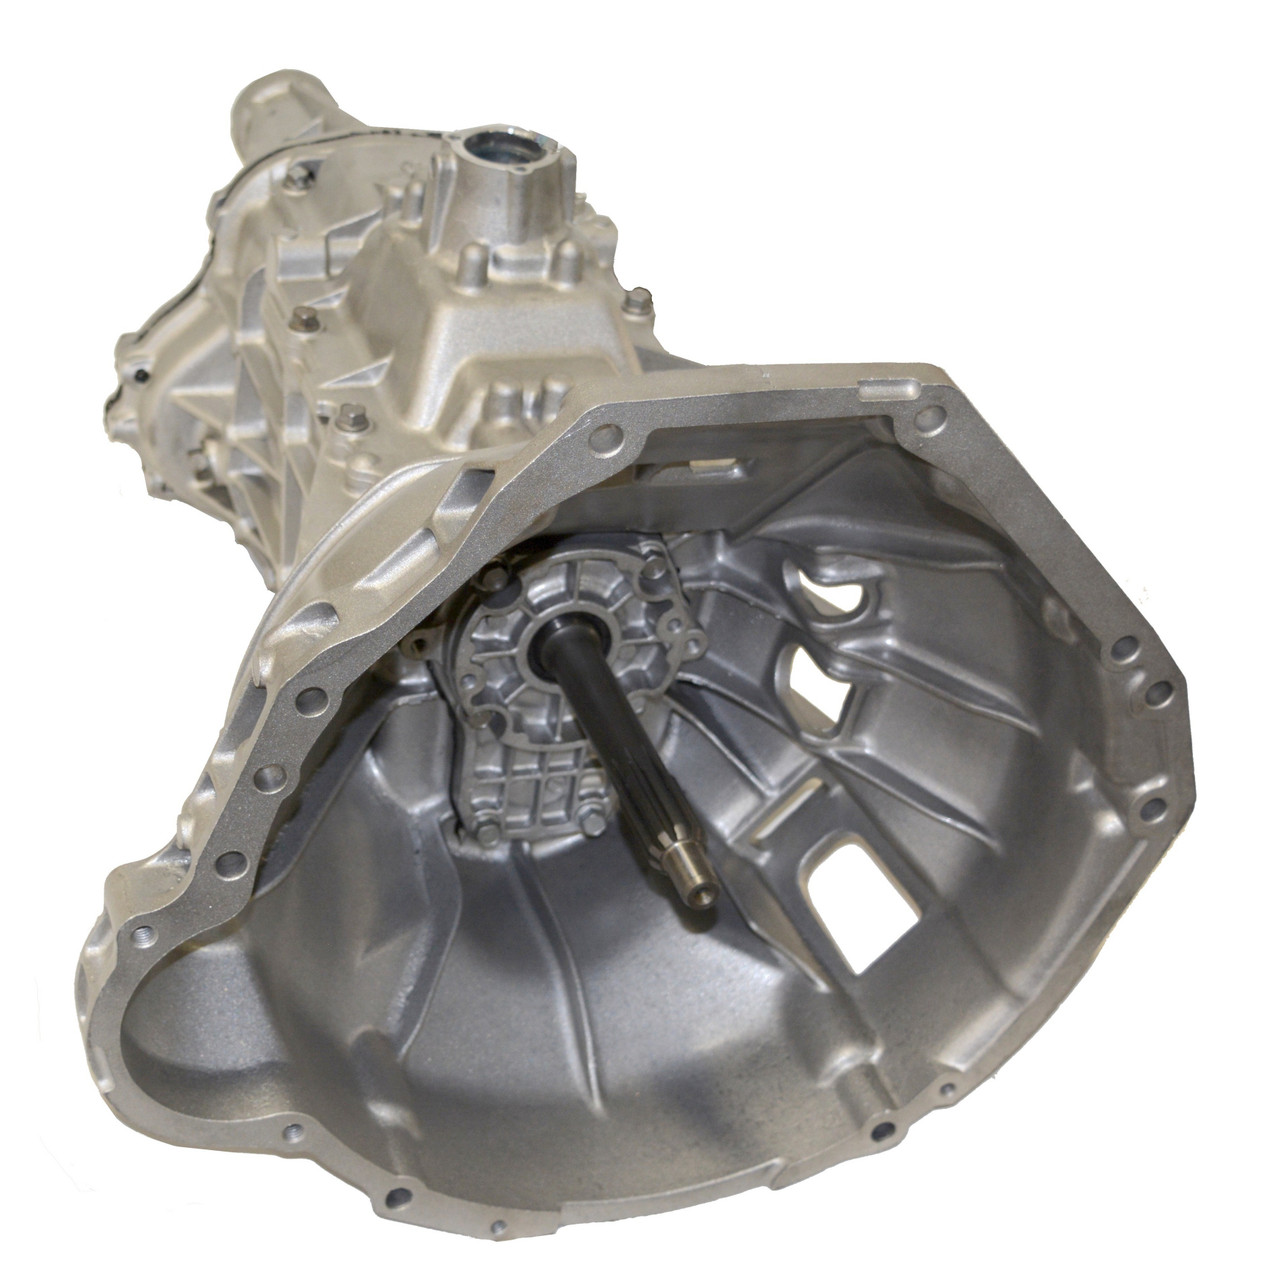 Remanufactured 6R60 Transmissions